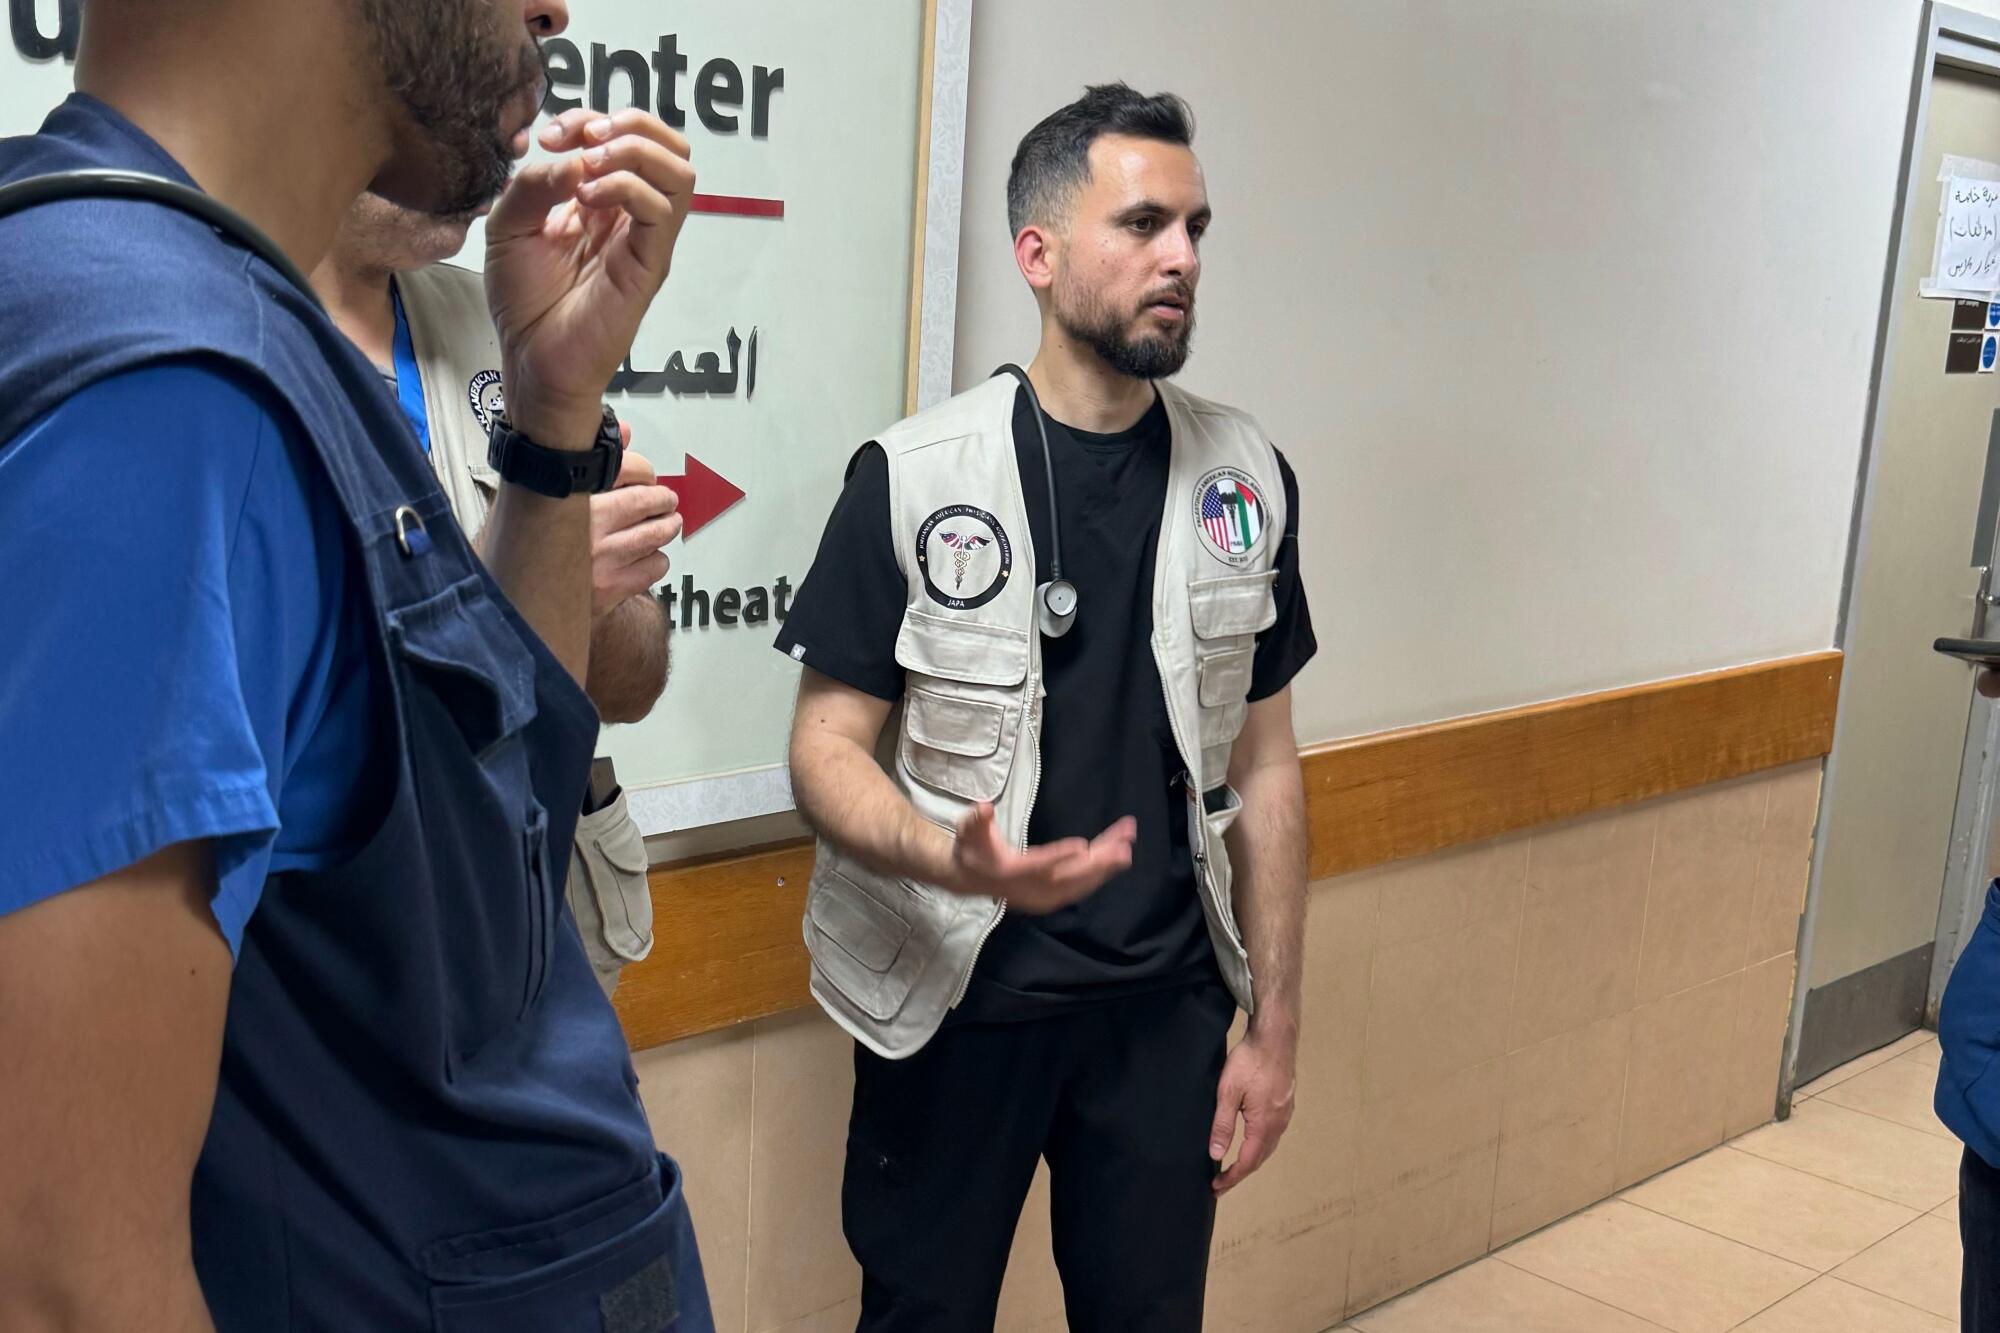 A man wearing a vest and stethoscope speaks to others in a hallway.